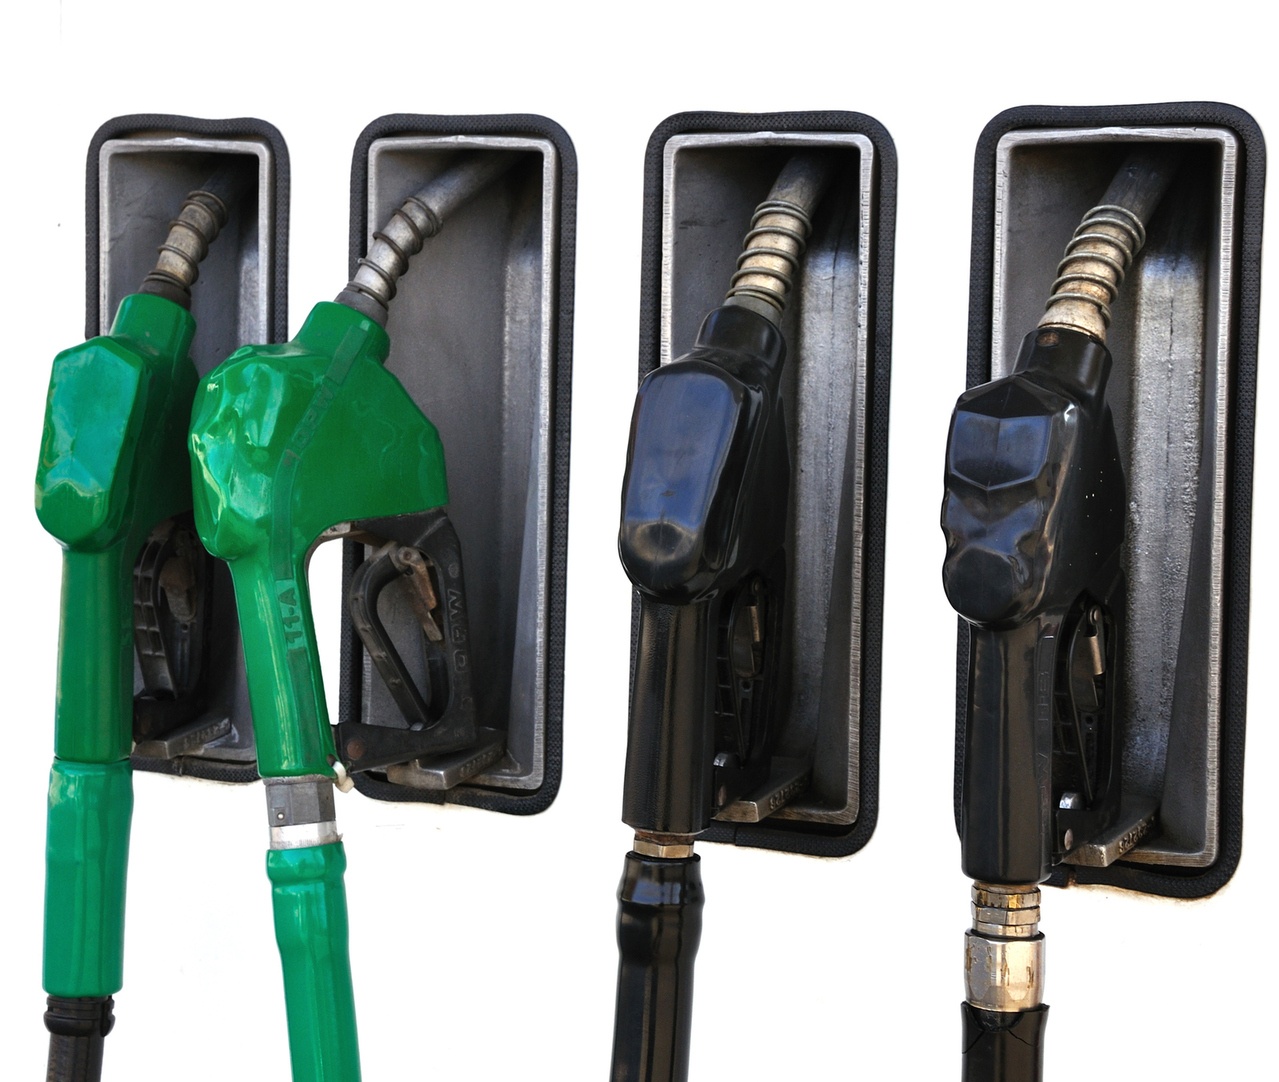 Four straightforward practices to help manage fuel consumption